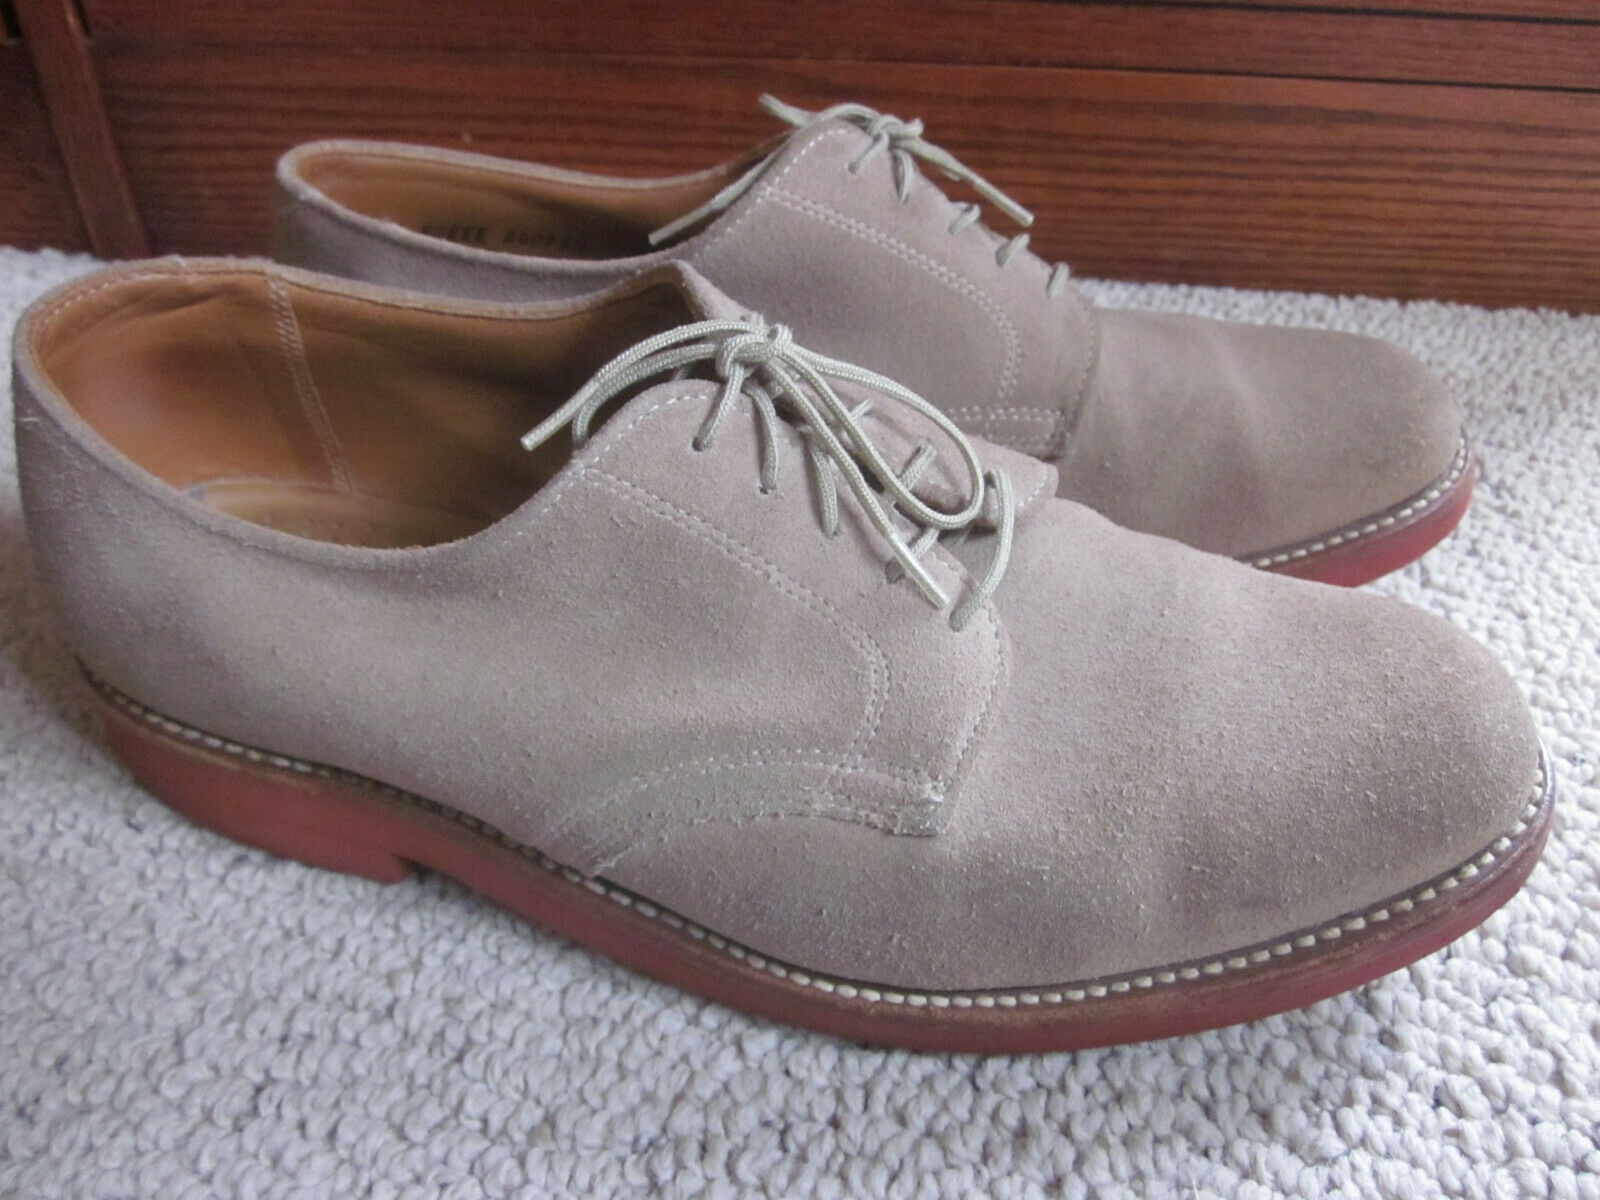 LL Bean Mens 8.5 EEE Shoes Tan Suede Leather Oxfords Casual Dress Lace ...